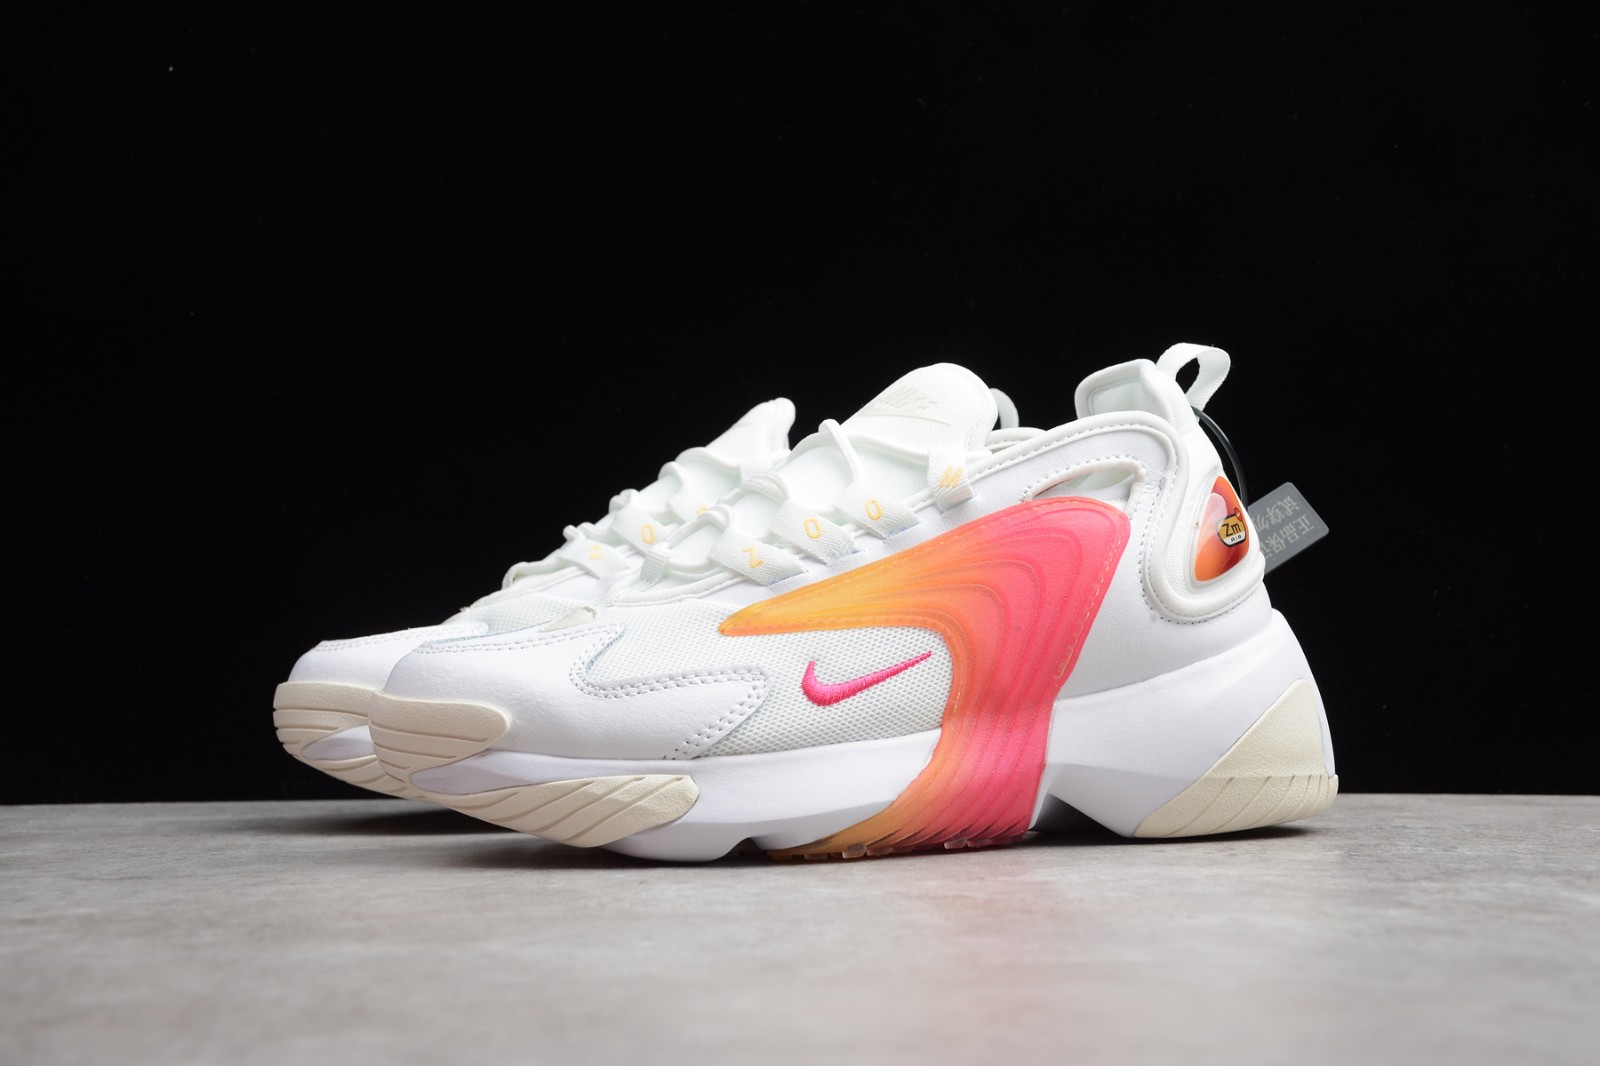 limpiar General construcción naval 1023 - nike huarache 2006 price in nepal today in tola - Nike Zoom 2K  Womens White Rush Pink AO0354 - GmarShops